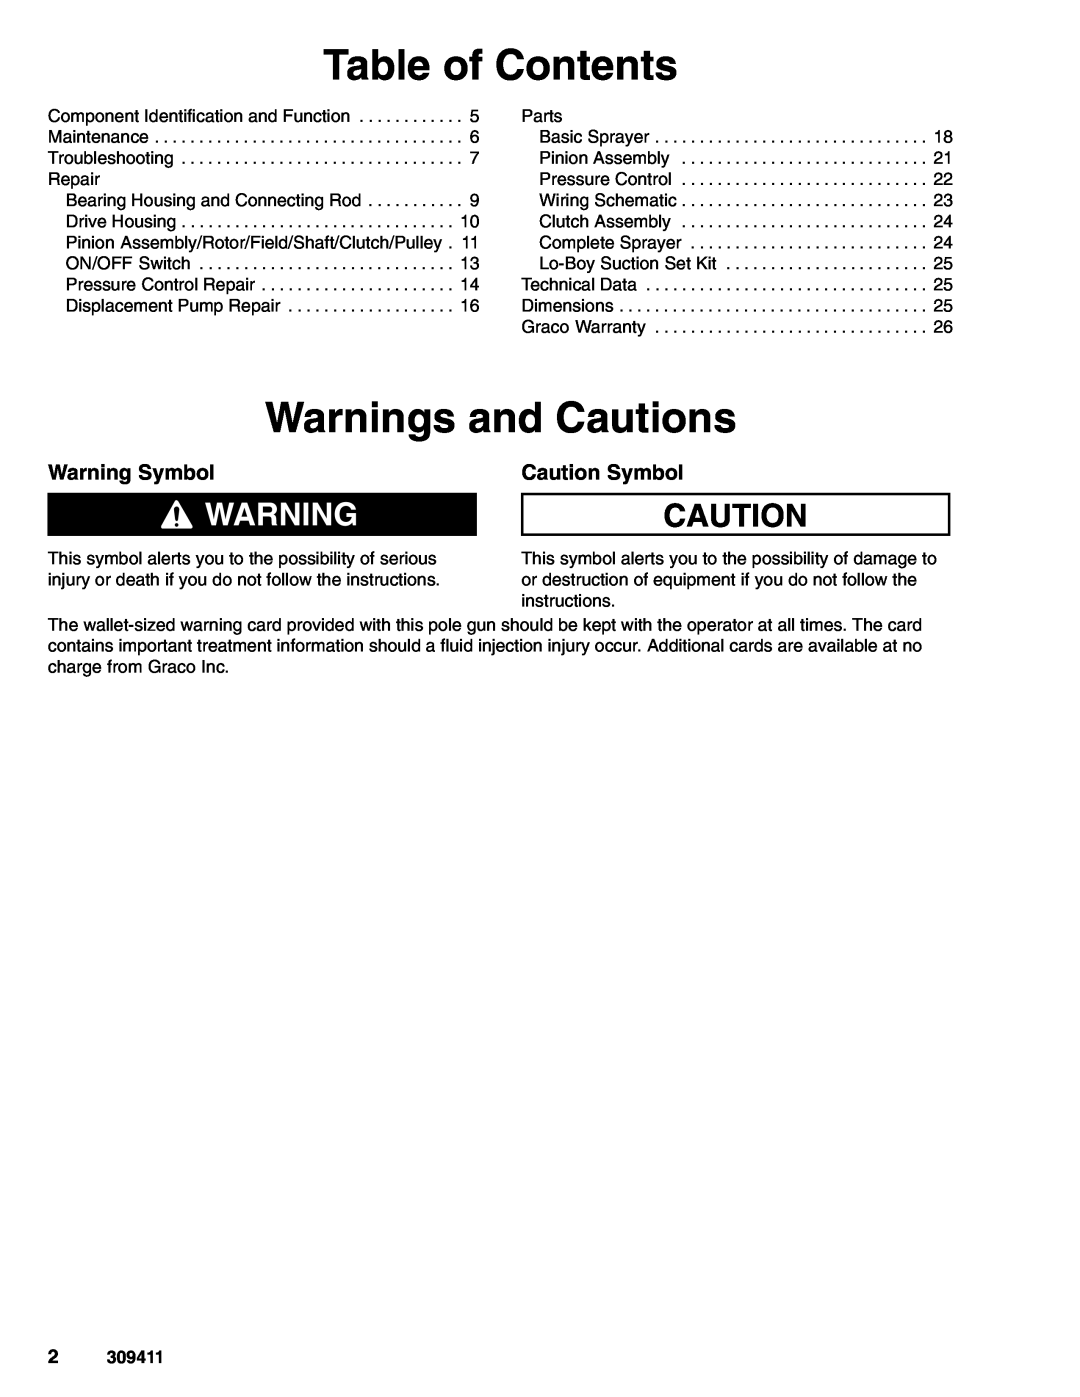 Graco 233715, 233710, 233712, 233711, 233713, 233709 Table of Contents, Warnings and Cautions, Warning Symbol, Caution Symbol 